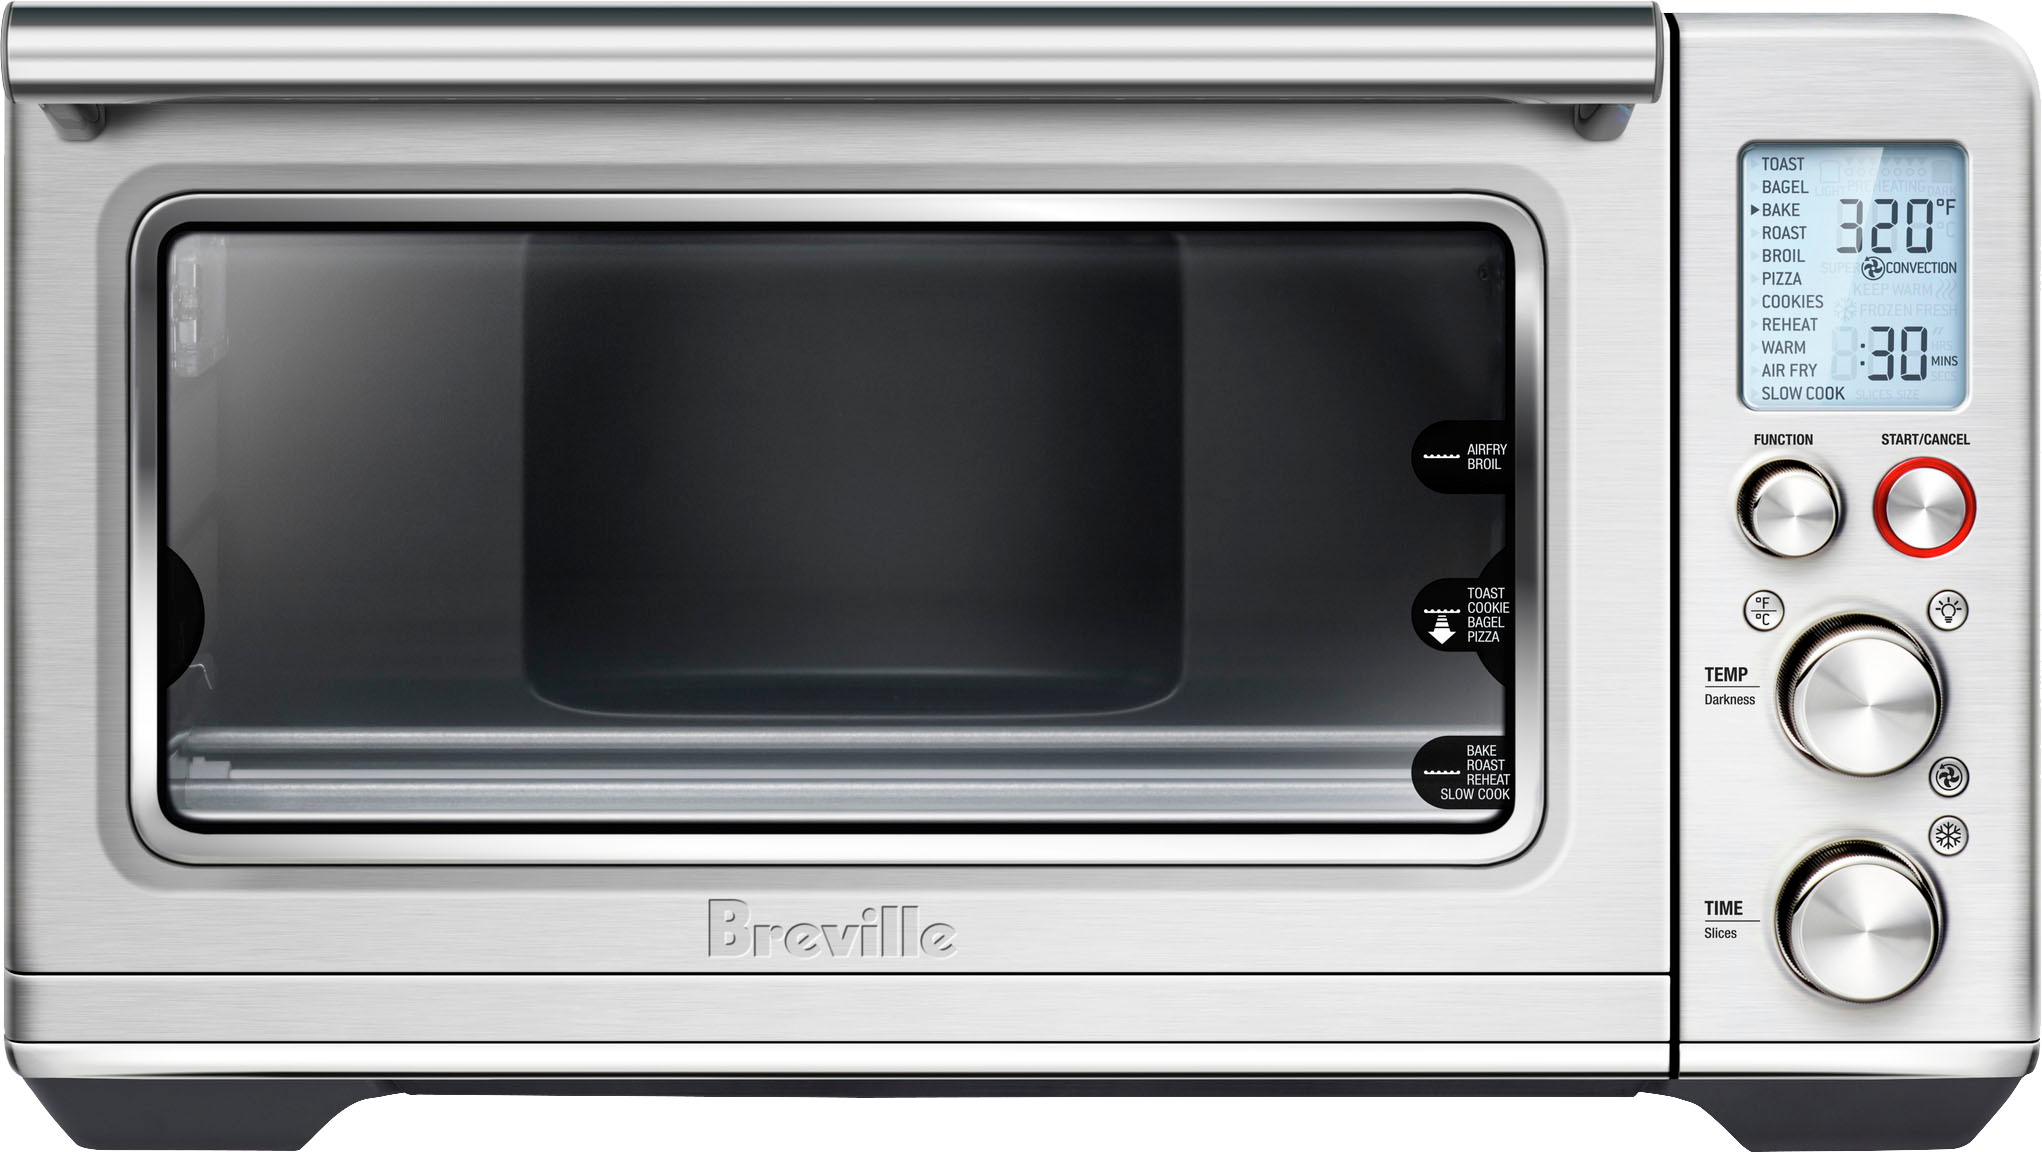 Breville Smart Oven Air Fryer - Brushed Stainless Steel